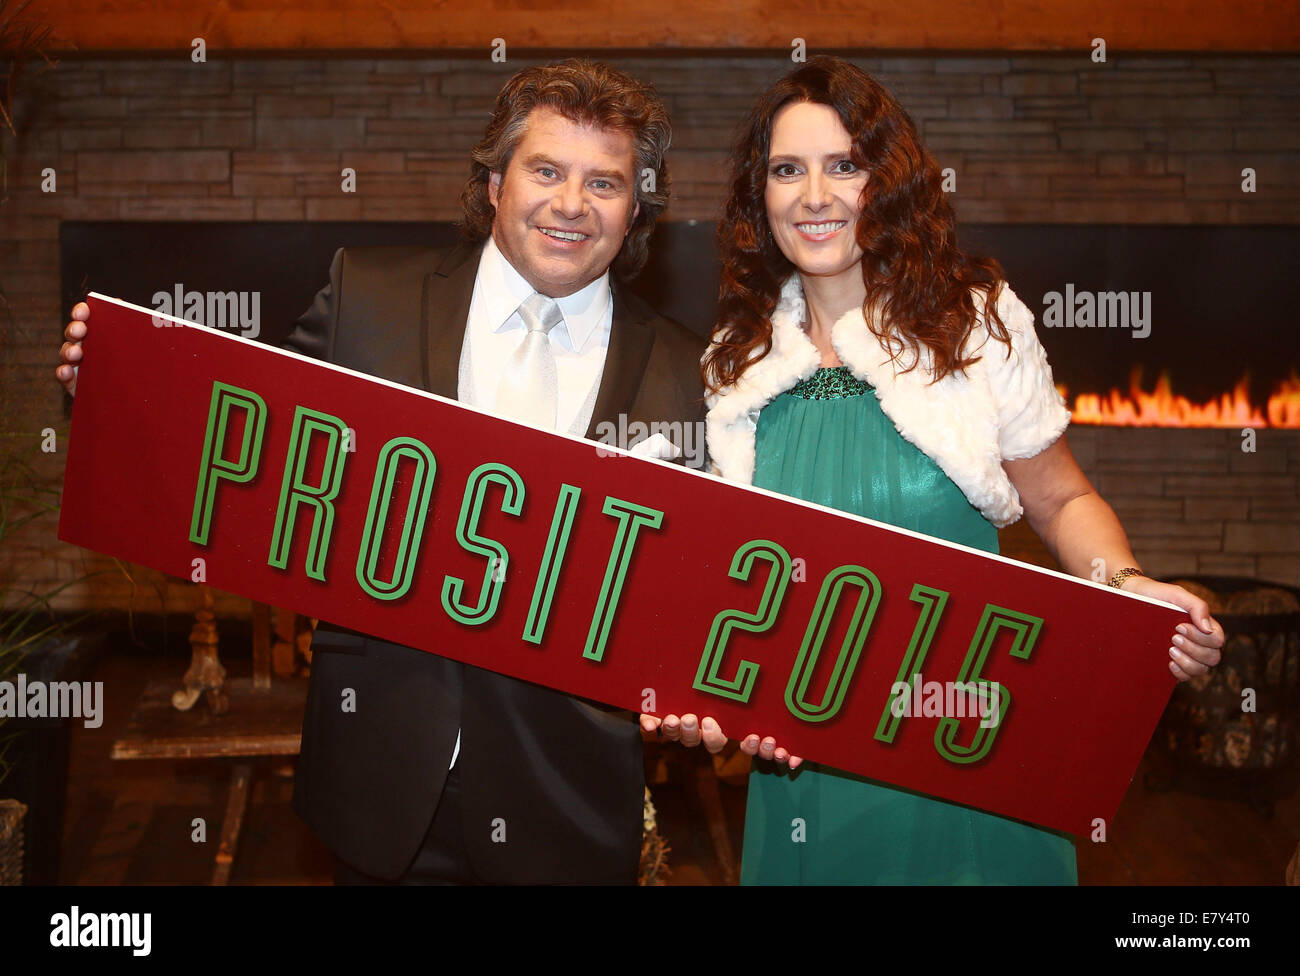 Presenter of the German television music show 'Musikantenstadl', Andy Borg (L) and his wife Birgit hold a sign in their hands which reads 'Prosit 2015' (cheers 2015), as they pose for a  photo shooting during a show rehearsal in Passau, Germany, 25 September 2014. Photo: Bodo Schackow/dpa - NO WIRE SERVICE - Stock Photo